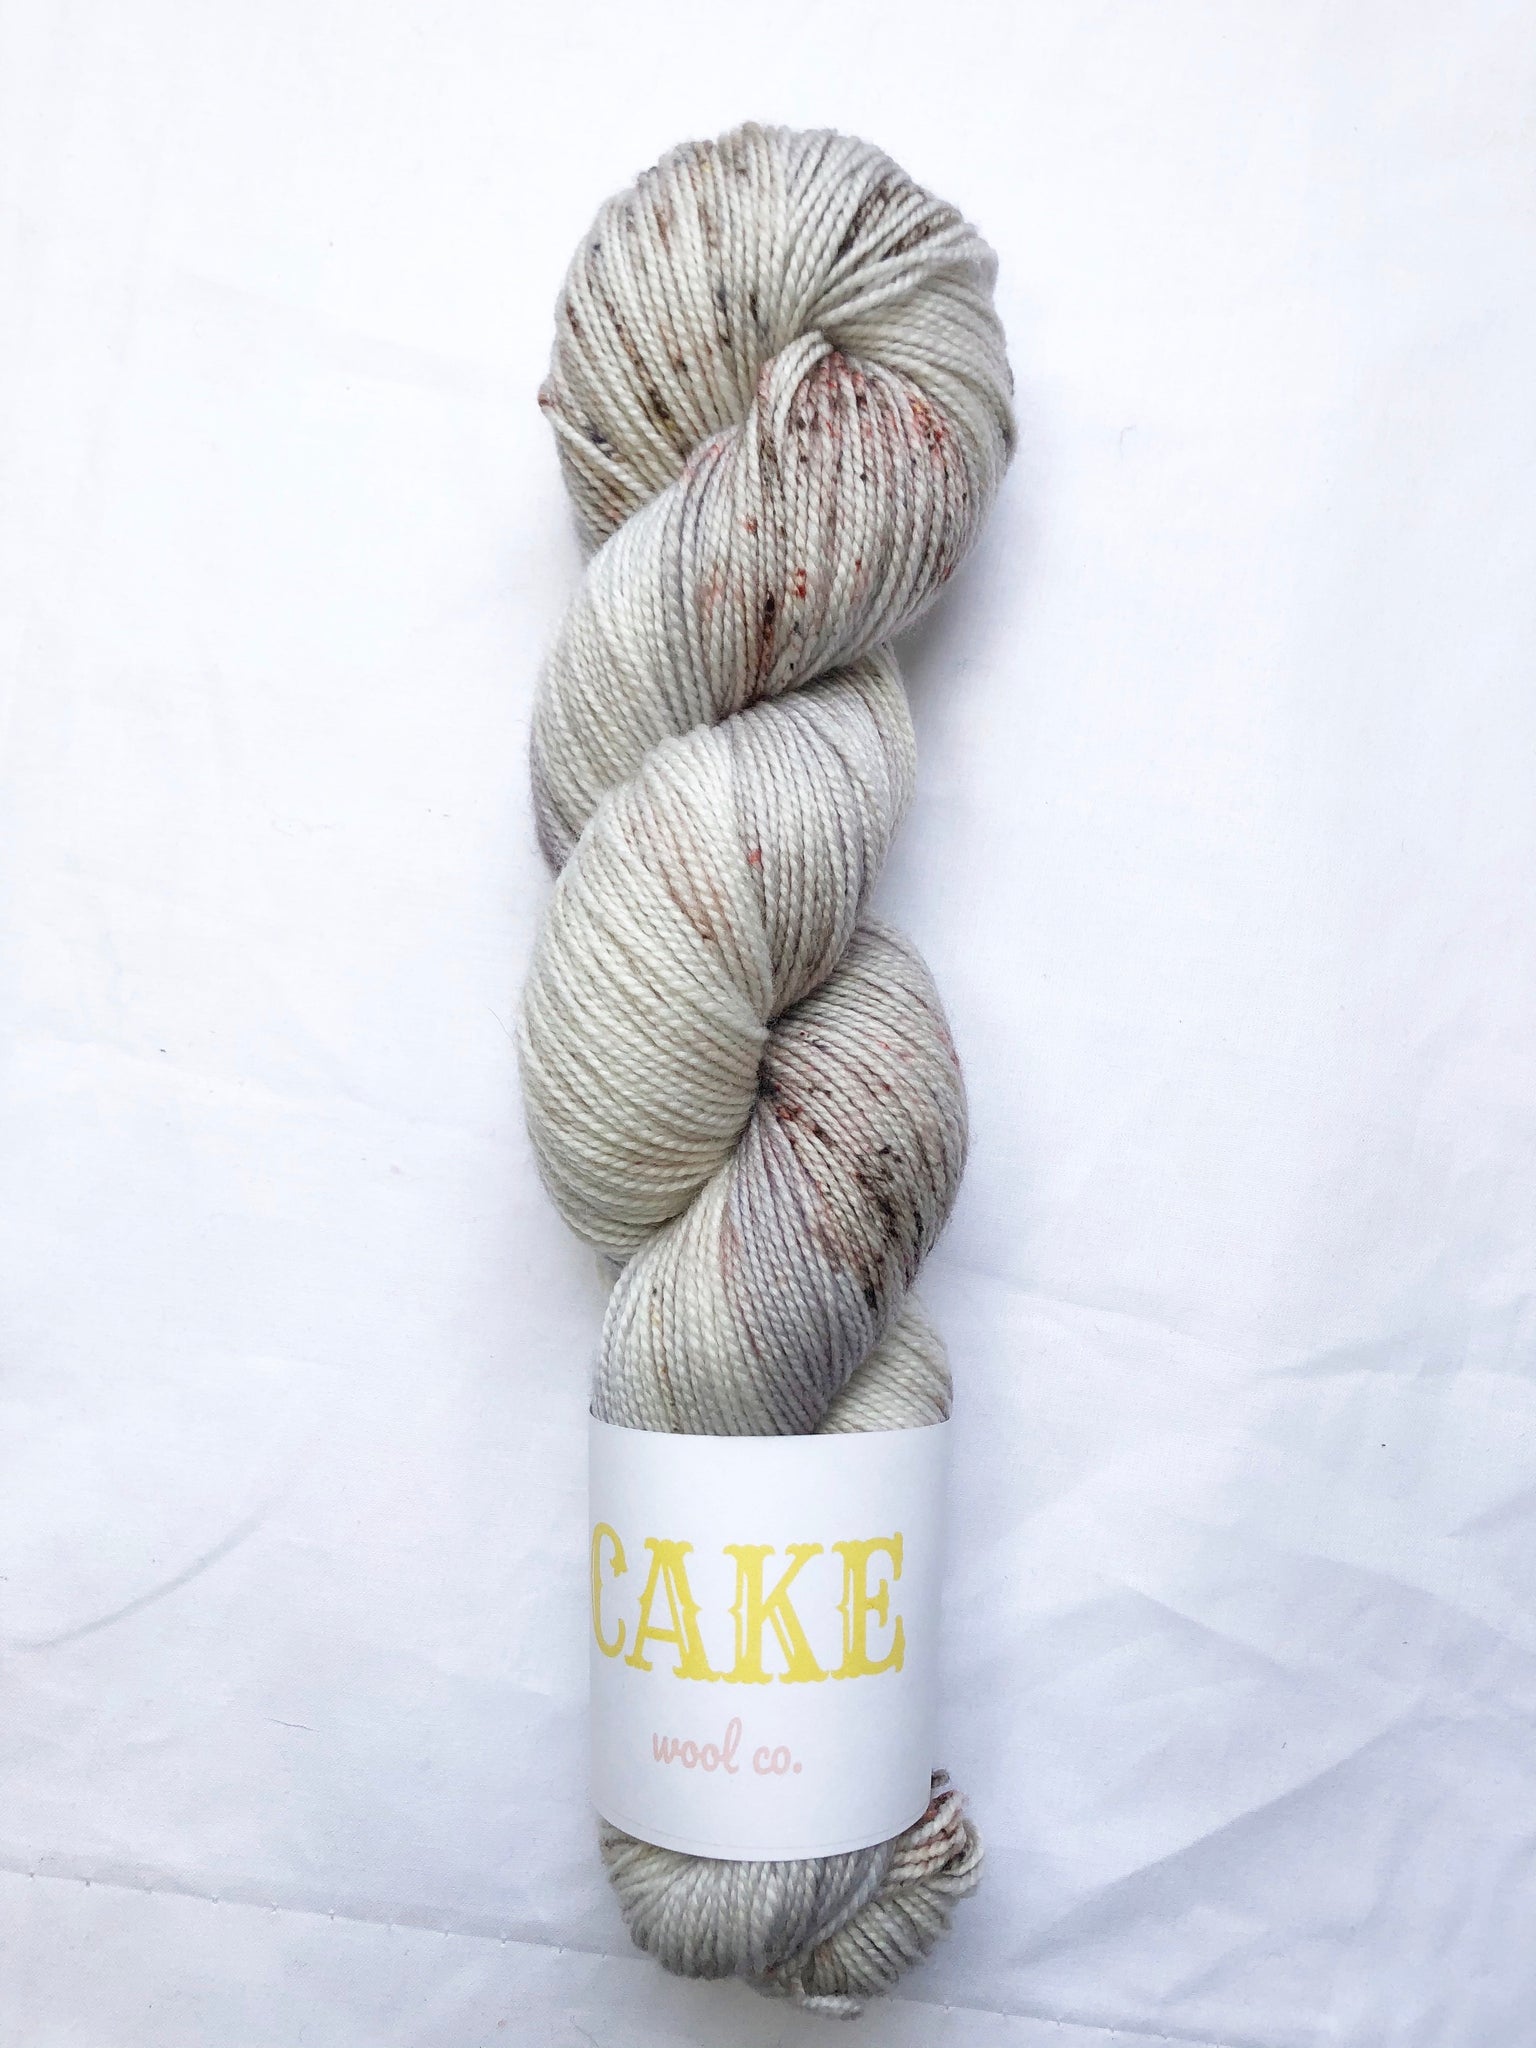 Whisk – The Mermaid's Purl